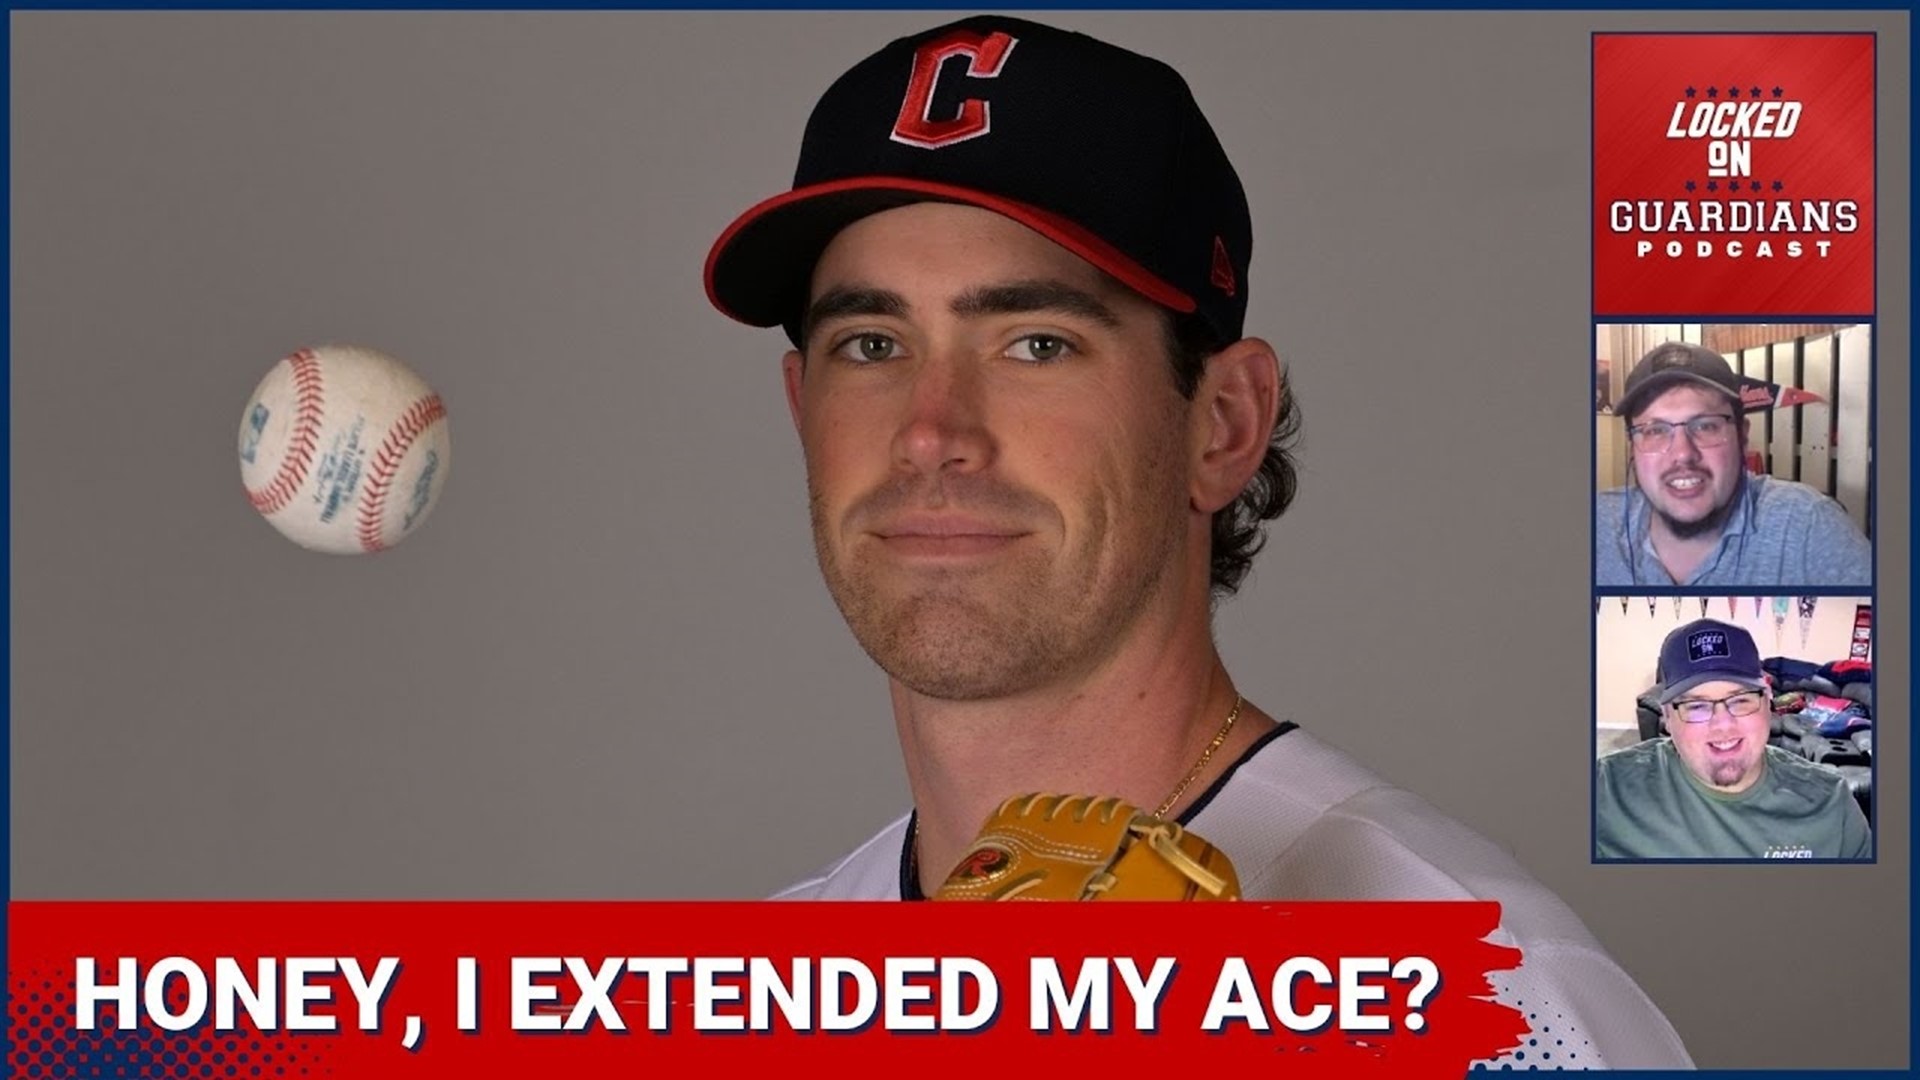 What Does a Shane Bieber Extension Look Like? Locked On Guardians Bonus Episode of the Week!